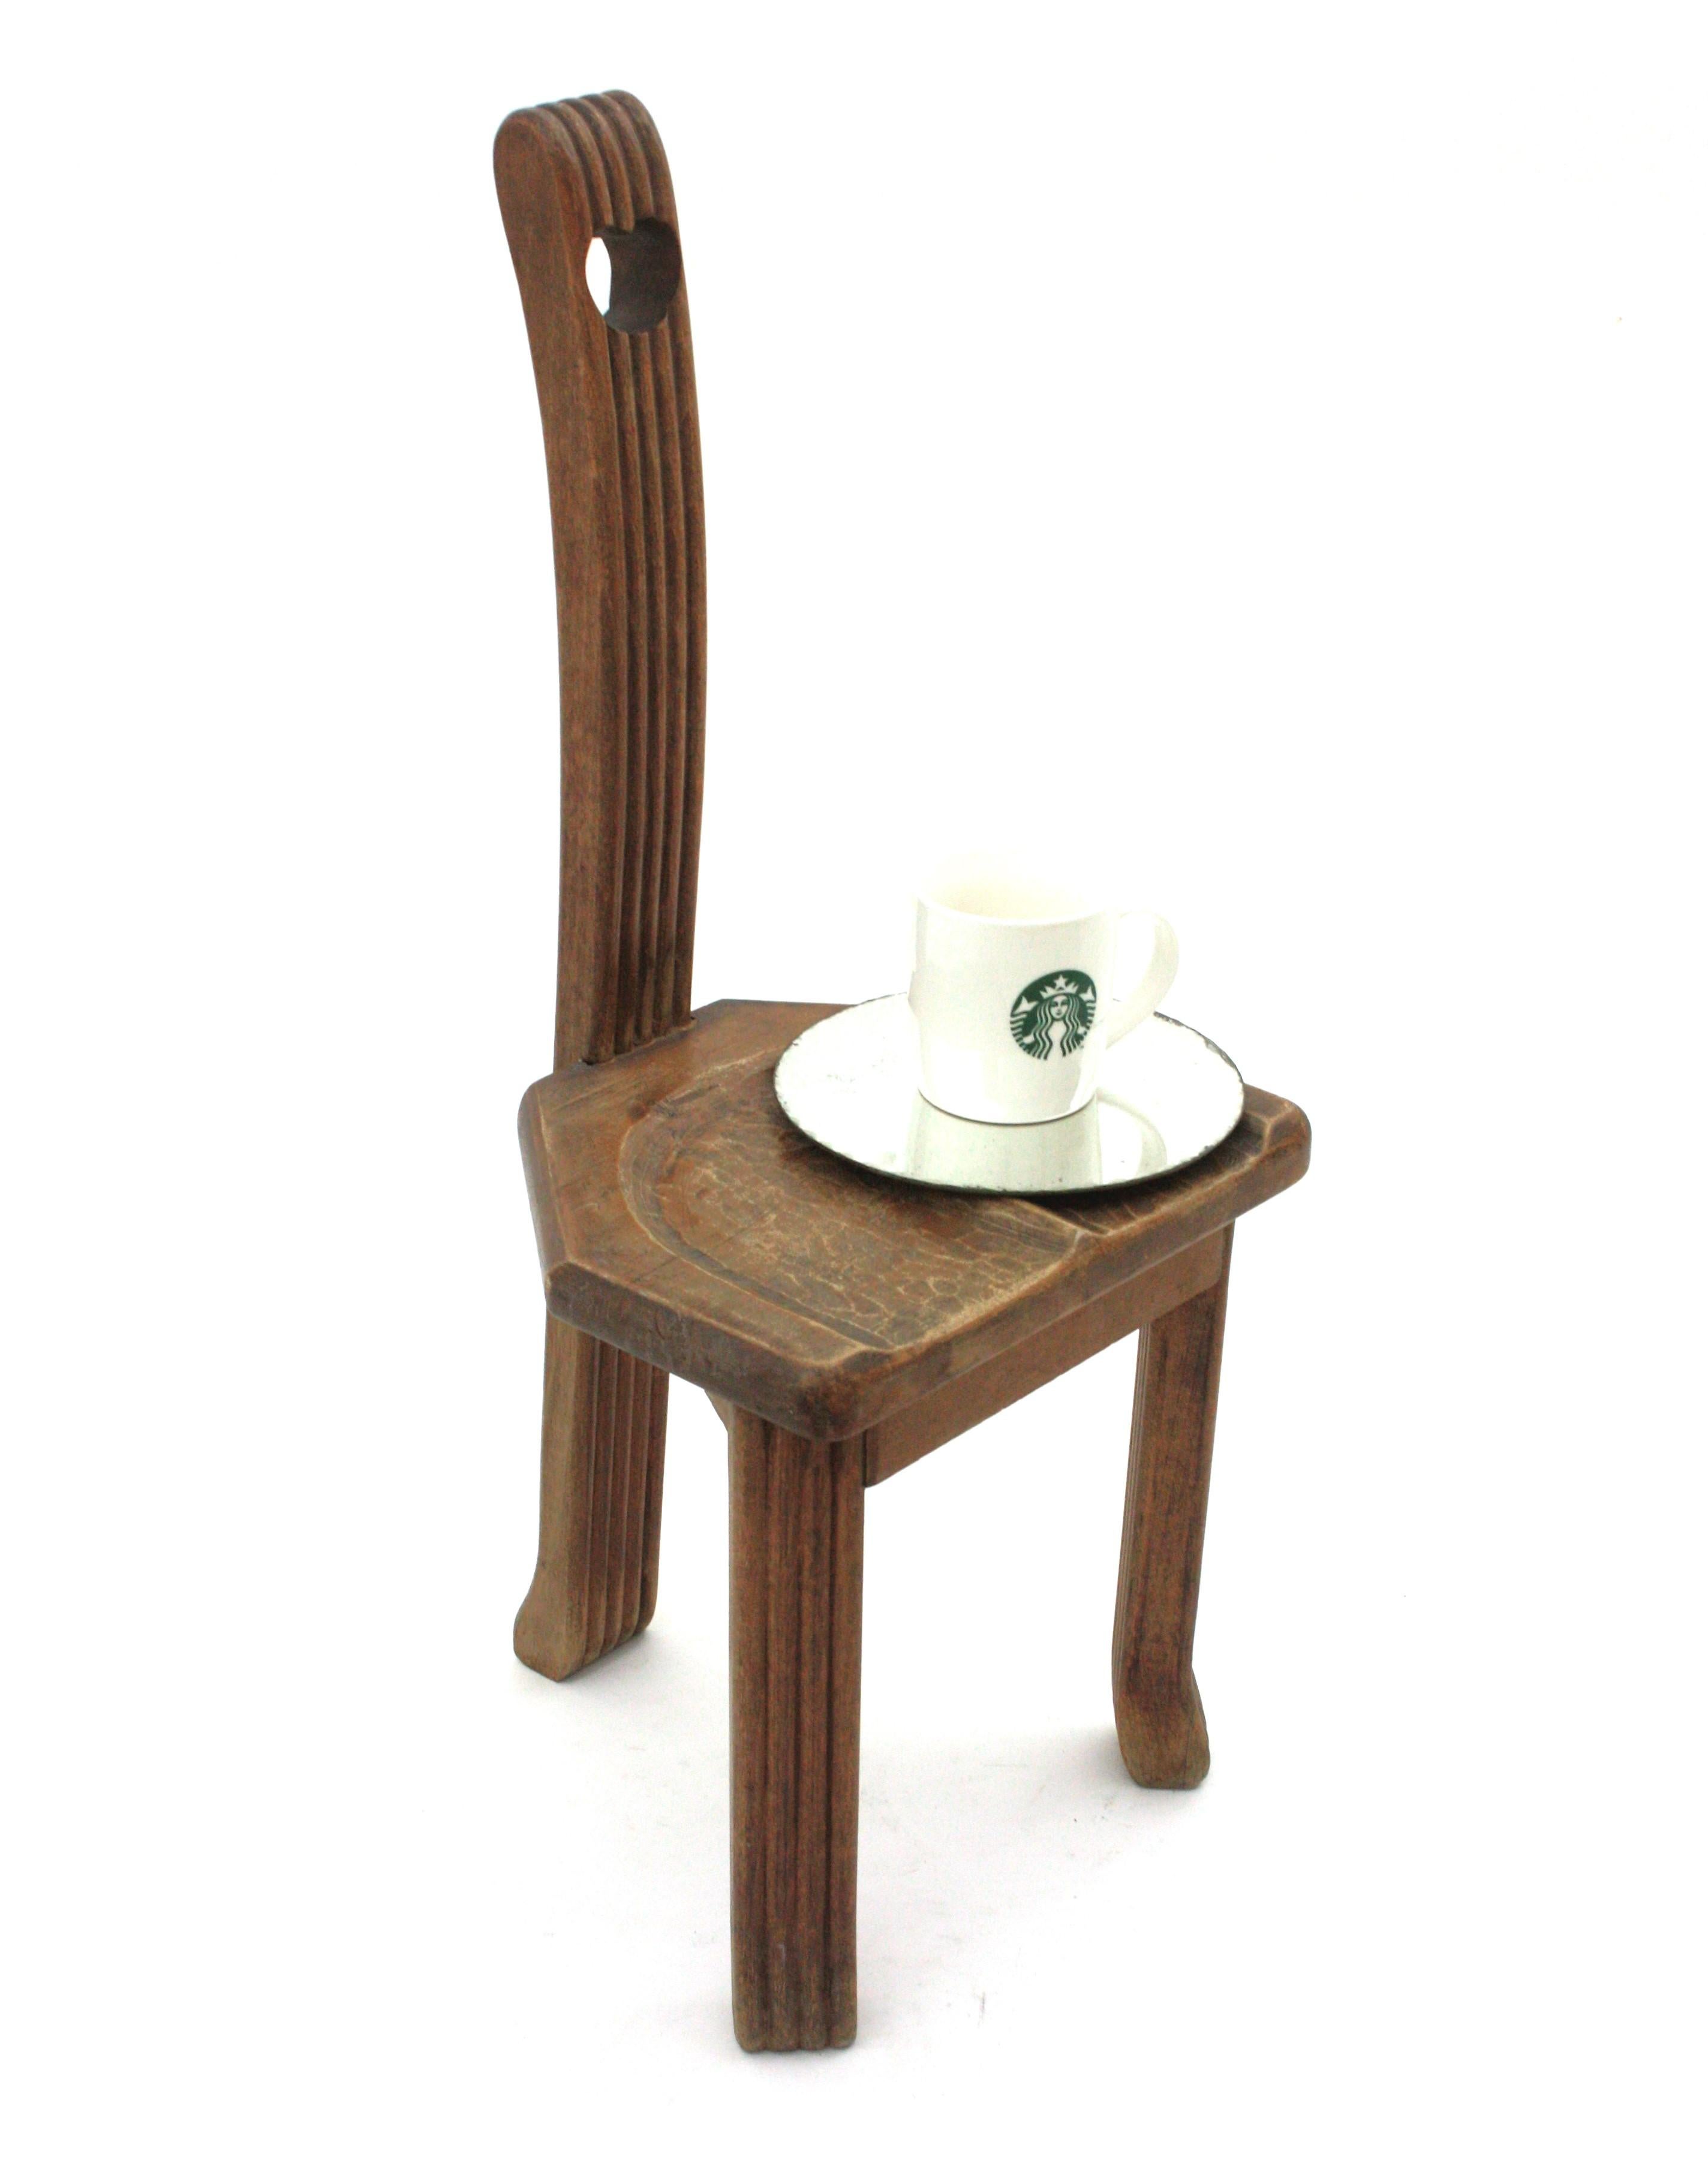 French Brutalist Wood Side Table Tripod Stool with High Backrest, 1950s For Sale 3